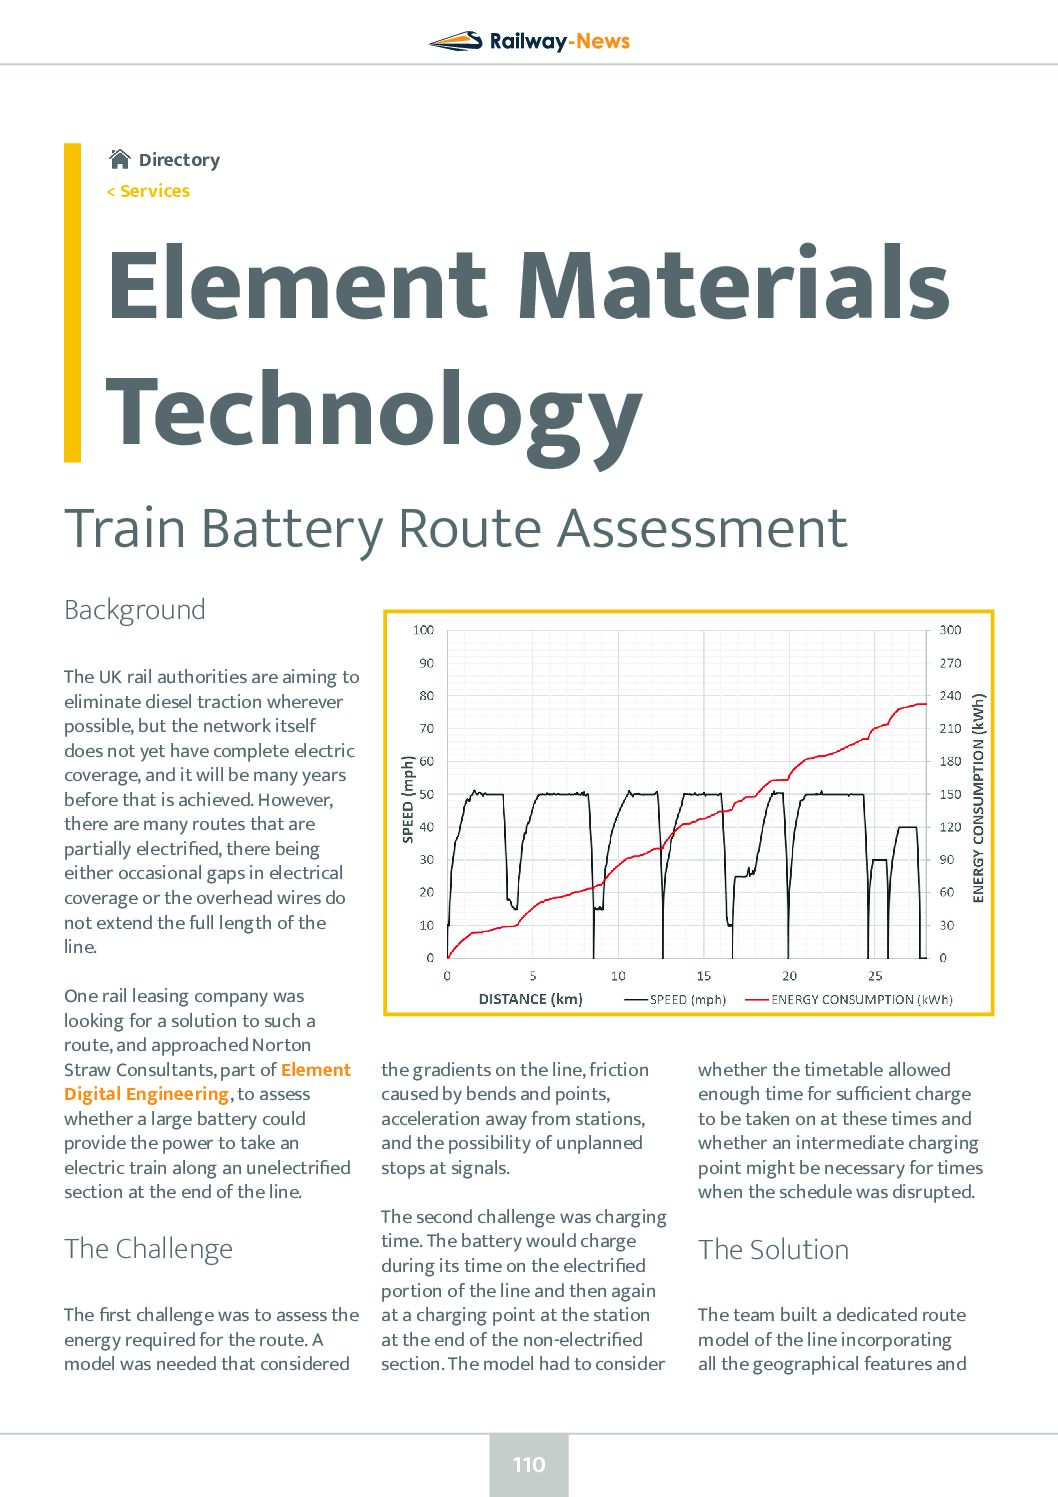 Train Battery Route Assessment